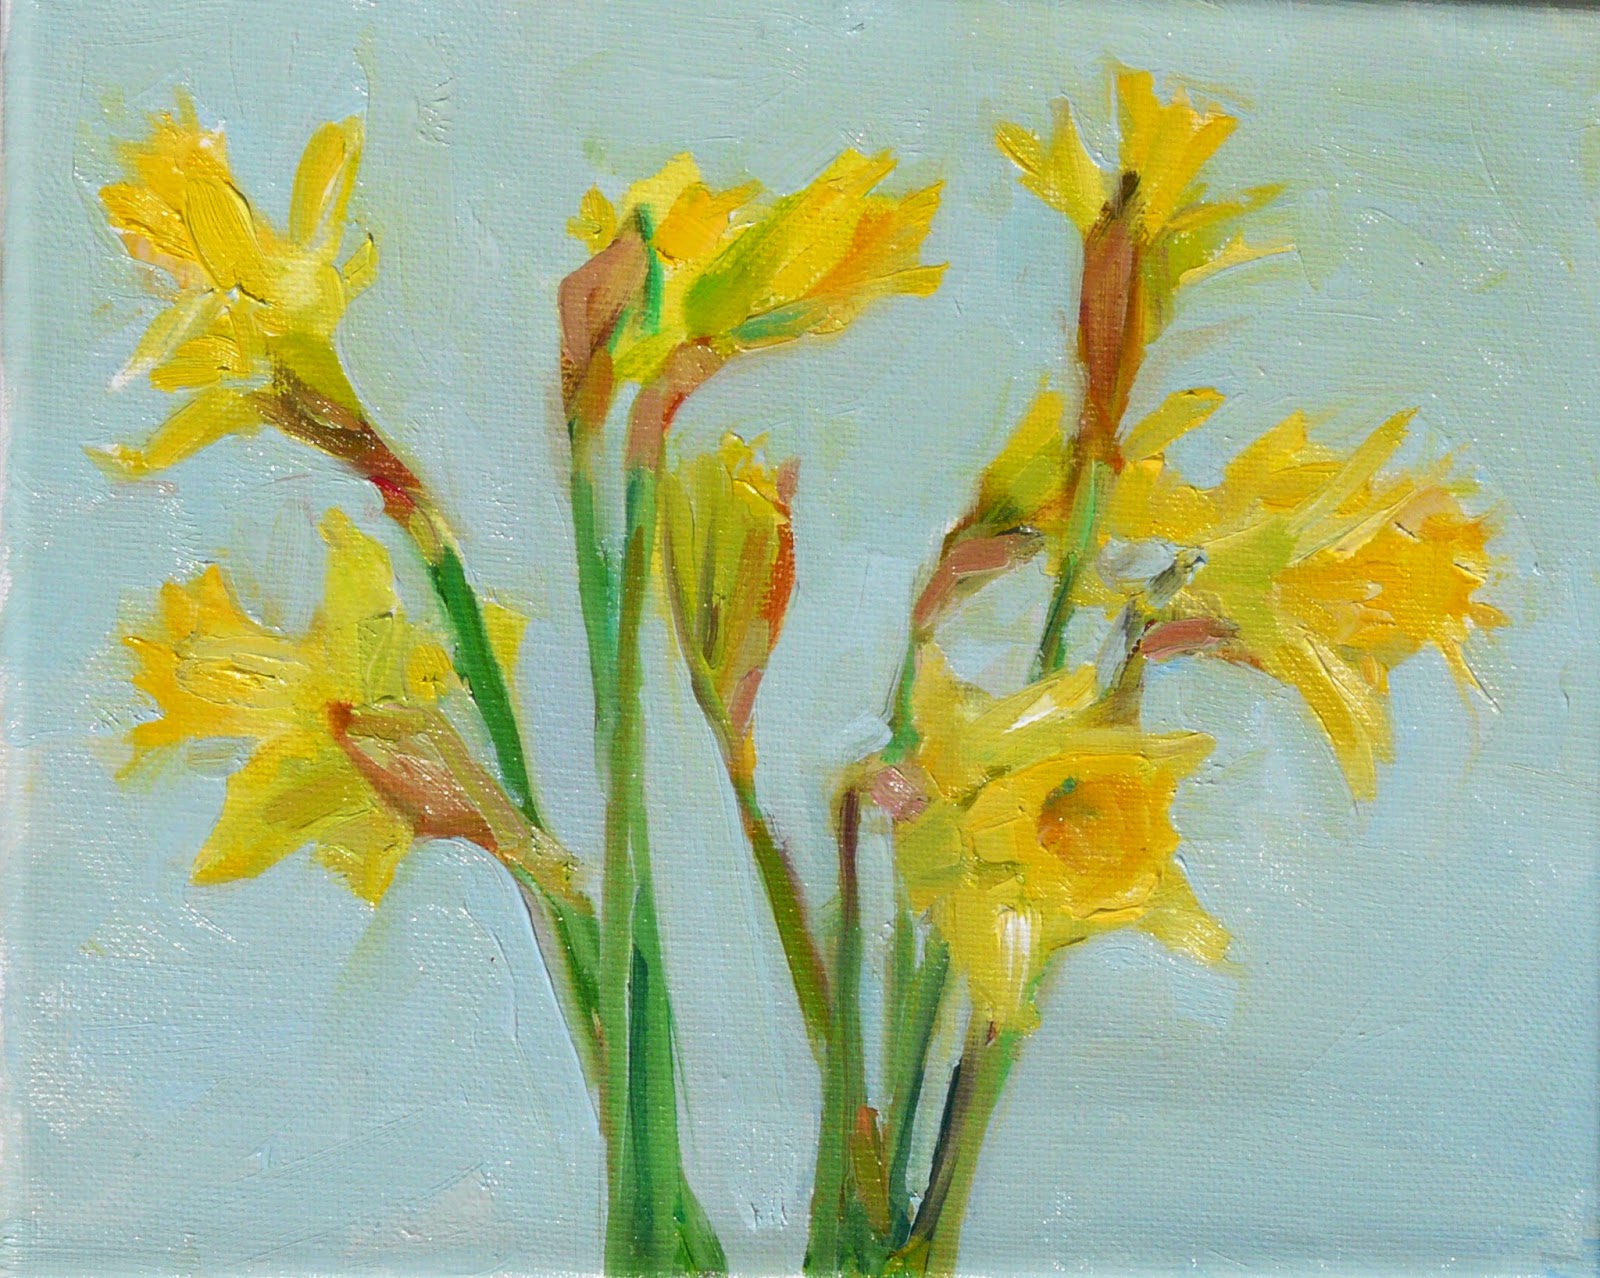 Art Every Day : Daffodils,still life,oil on canvas,8x10,price$250